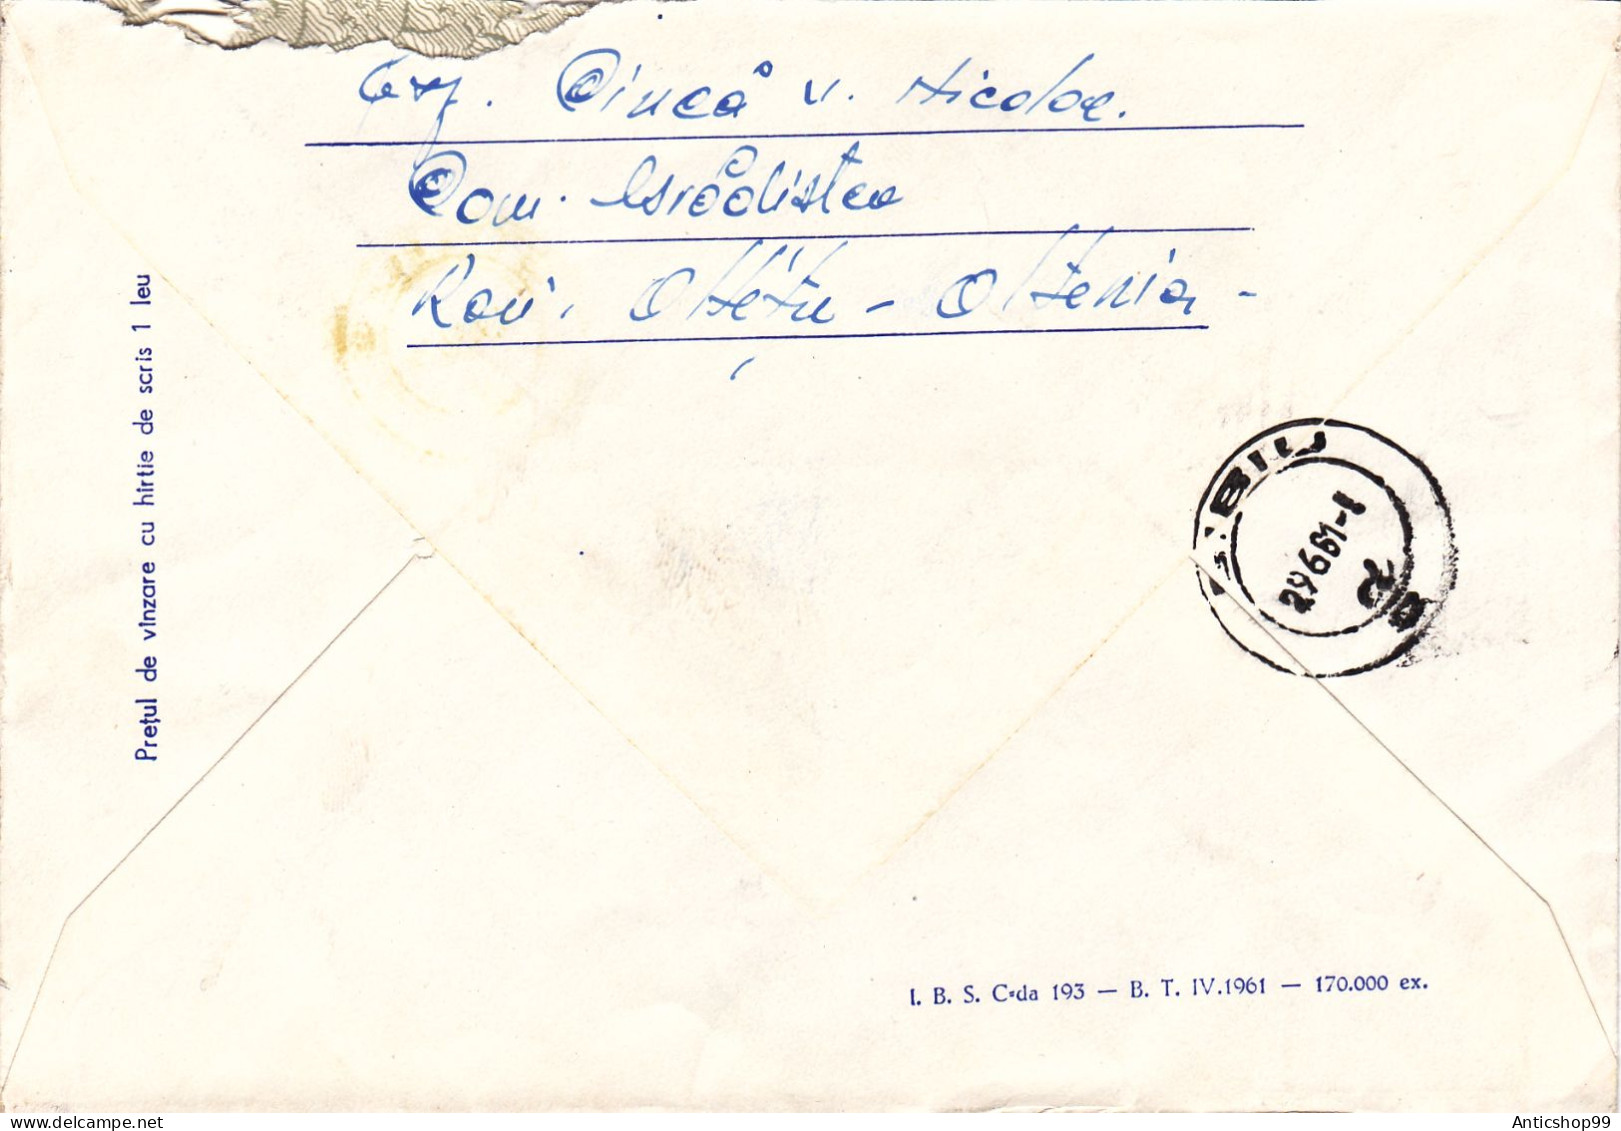 CONSTANTA , SHIP, SHINY PAPER , USED,   1961, COVERS STATIONERY   ROMANIA - Ganzsachen